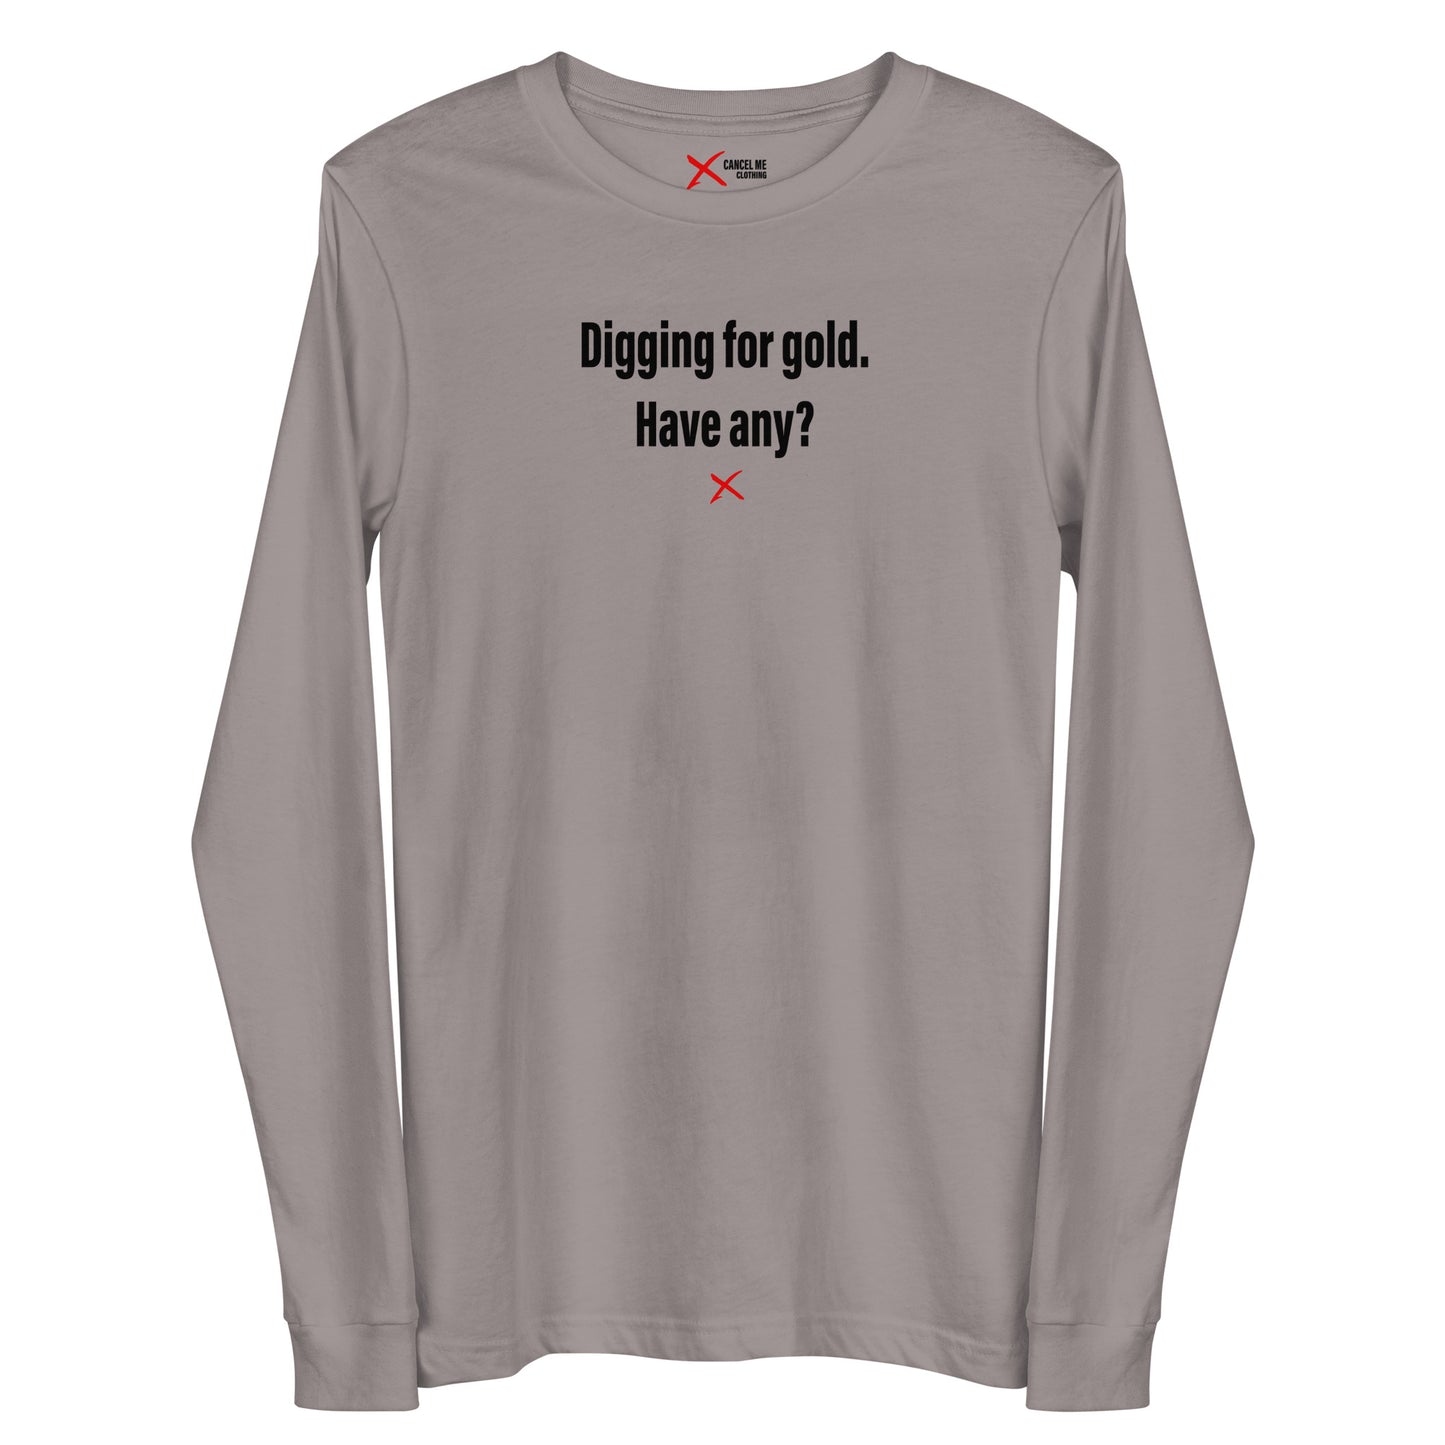 Digging for gold. Have any? - Longsleeve